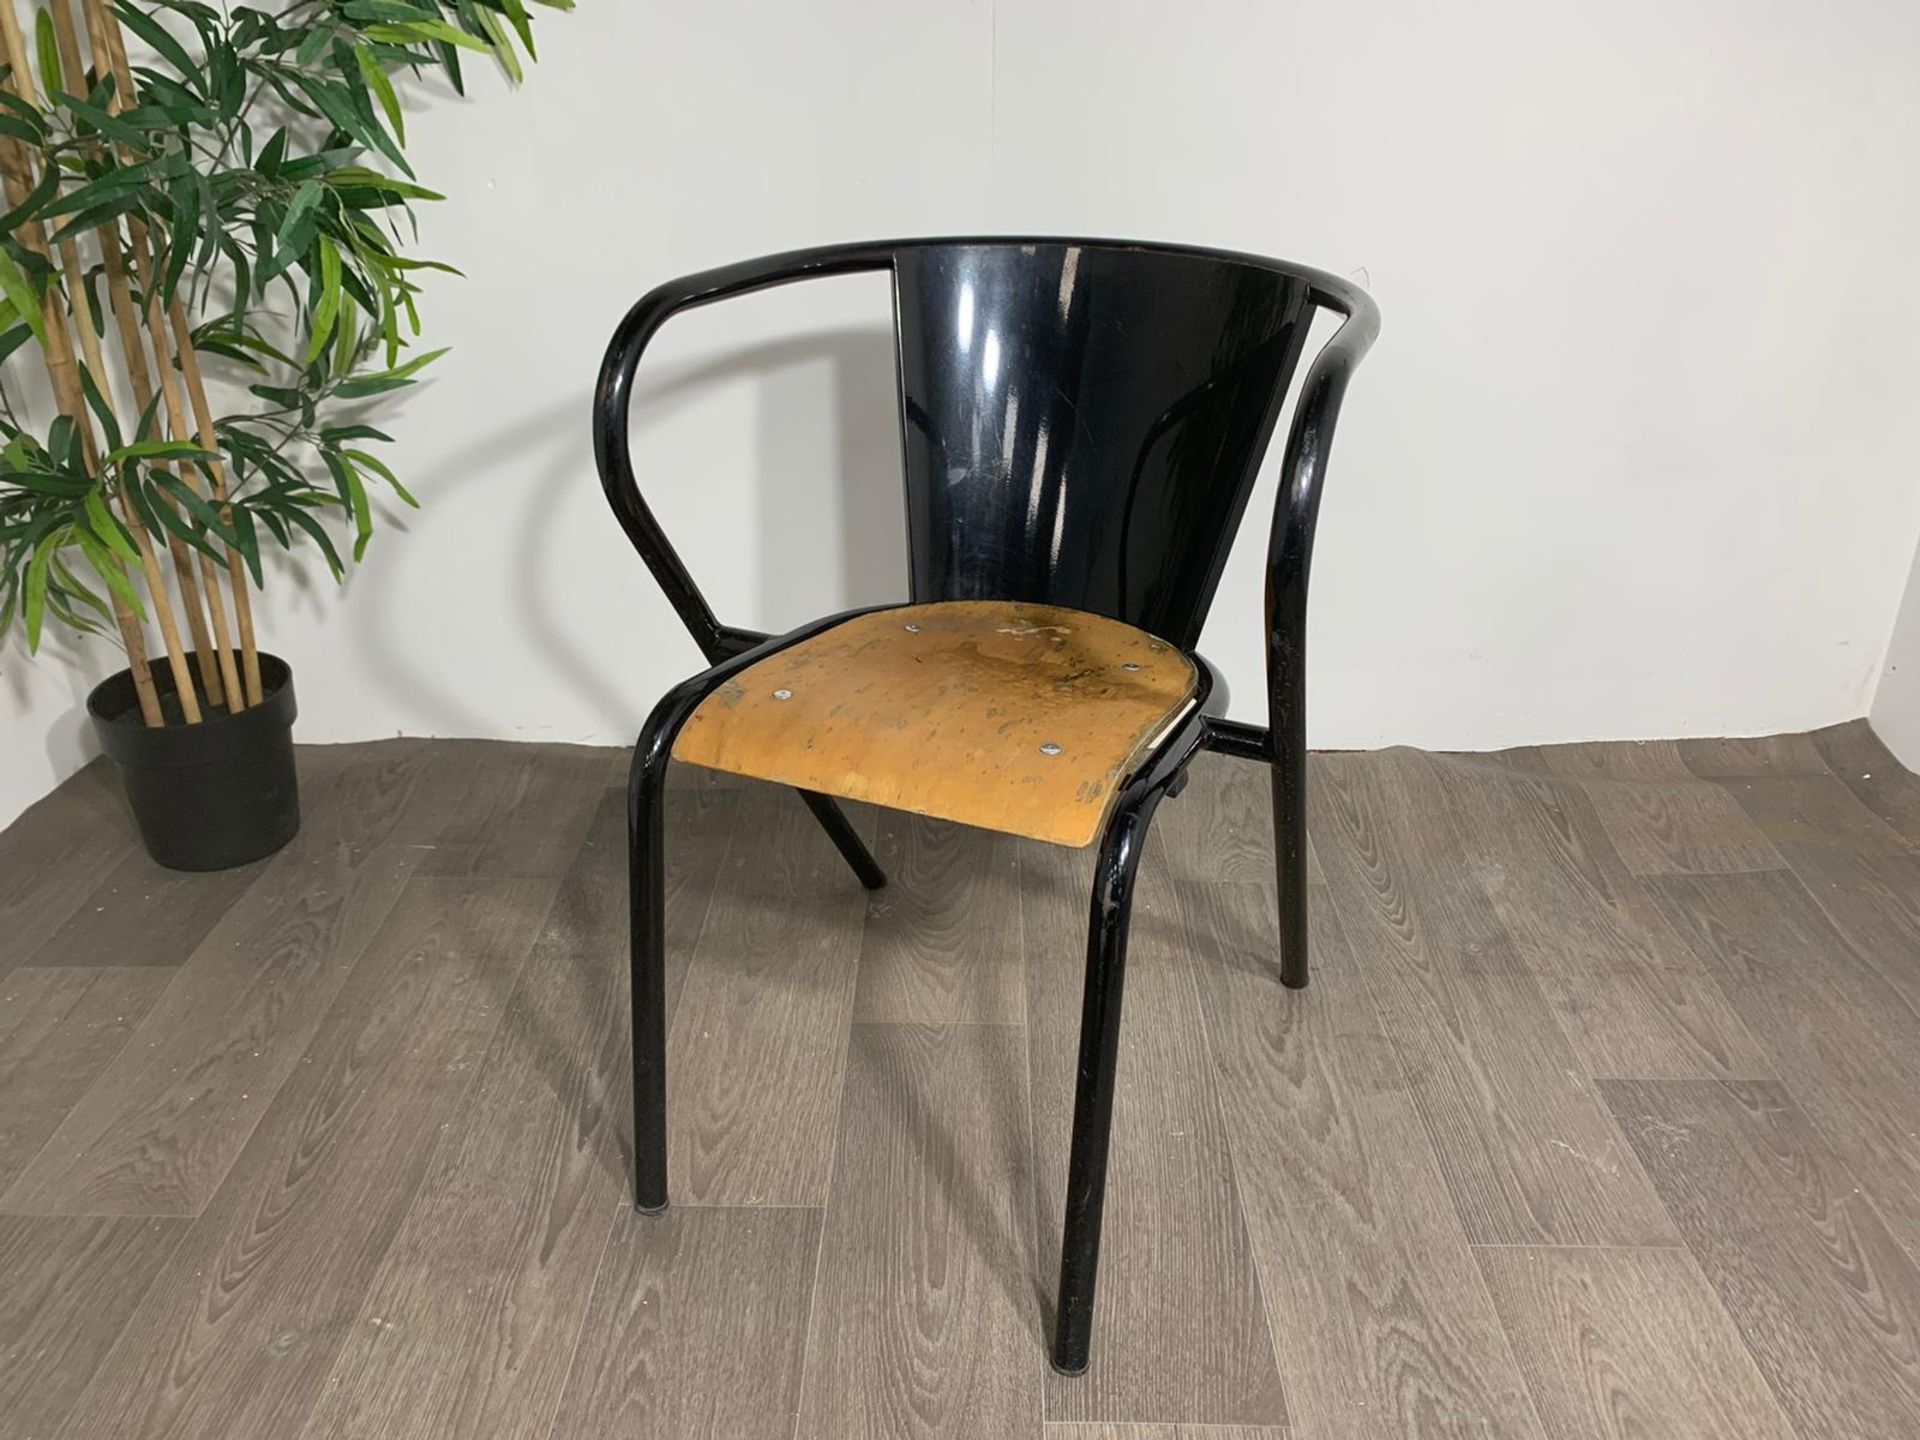 Adico 5008 Black Chair With Wooden Seat